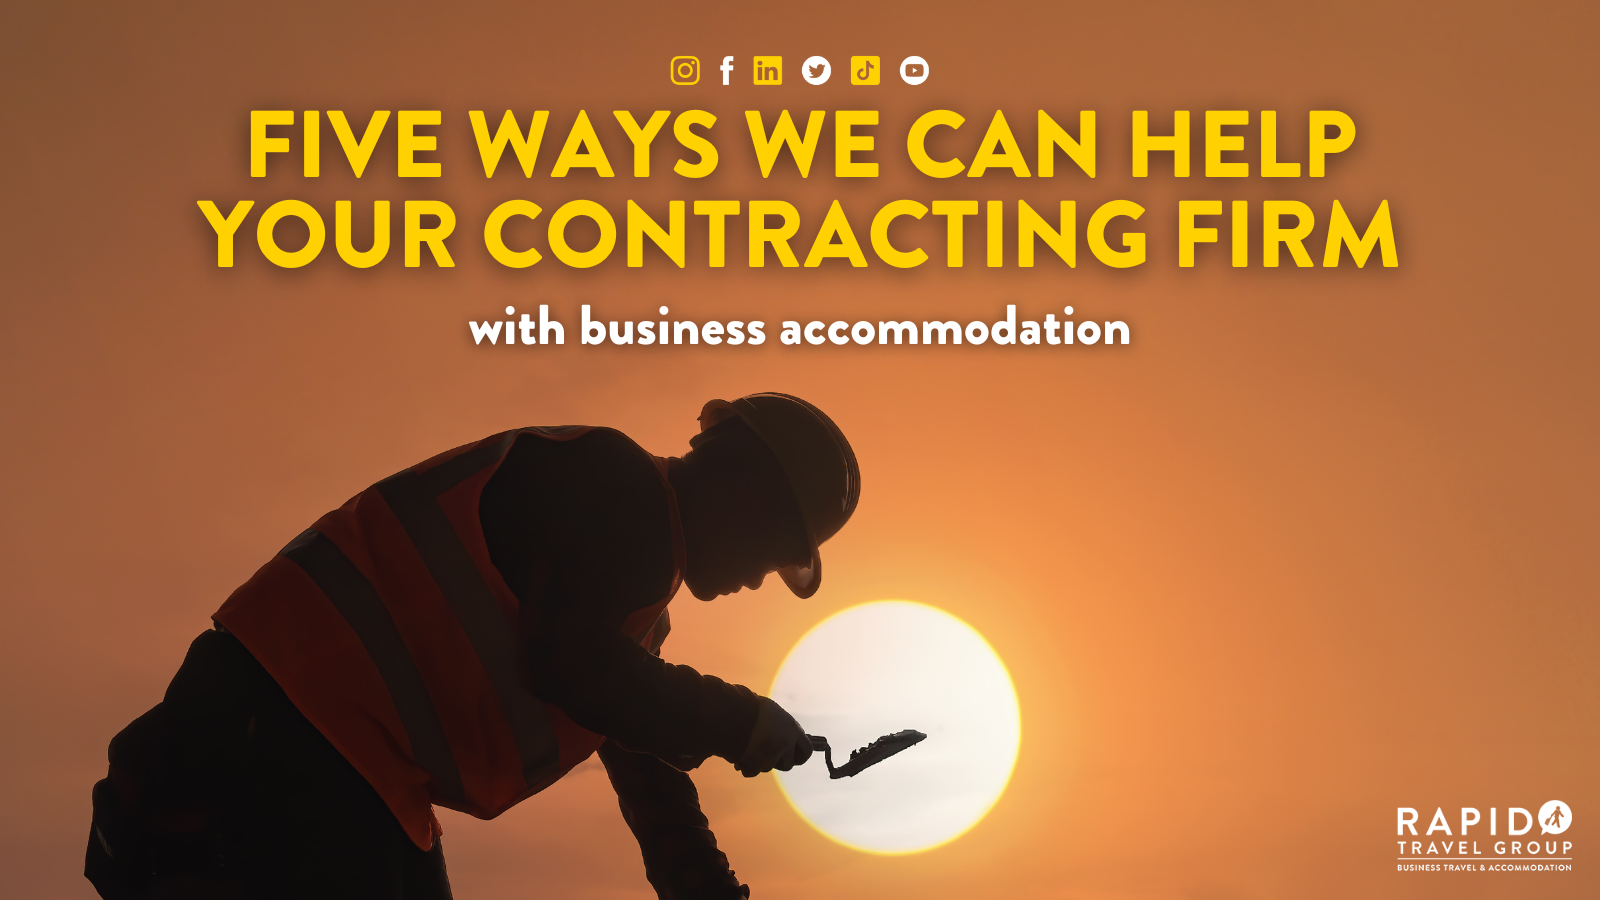 Five Ways We Can Help Your Contracting Firm with Business Accommodation